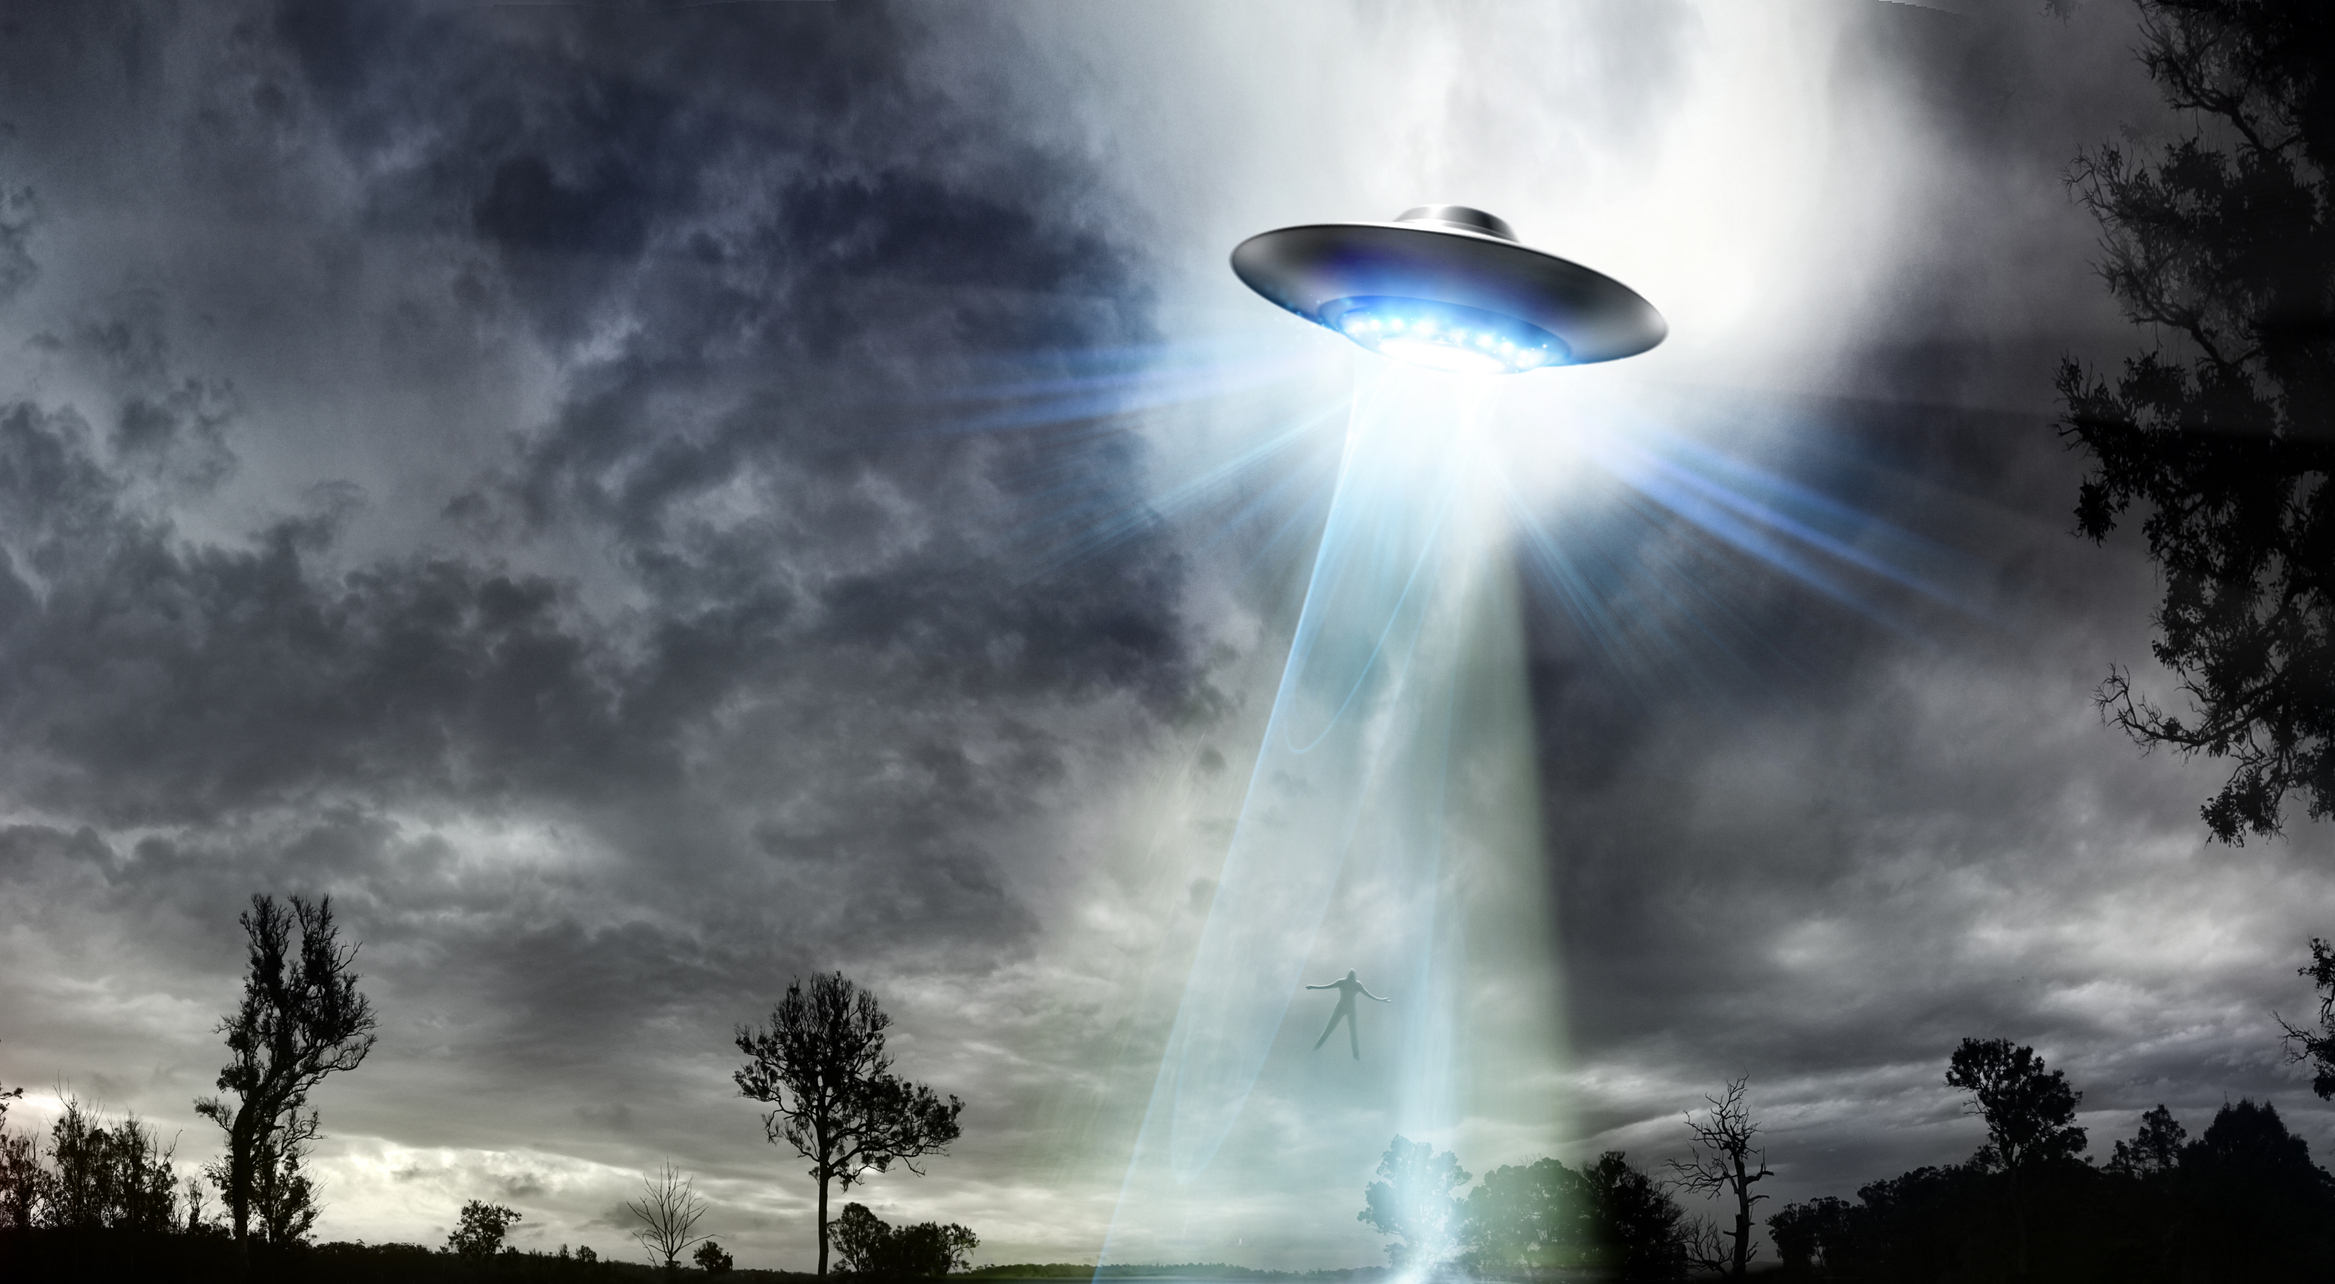 Congressman claims UFOs can go underwater, government hiding their existence since 1890s.